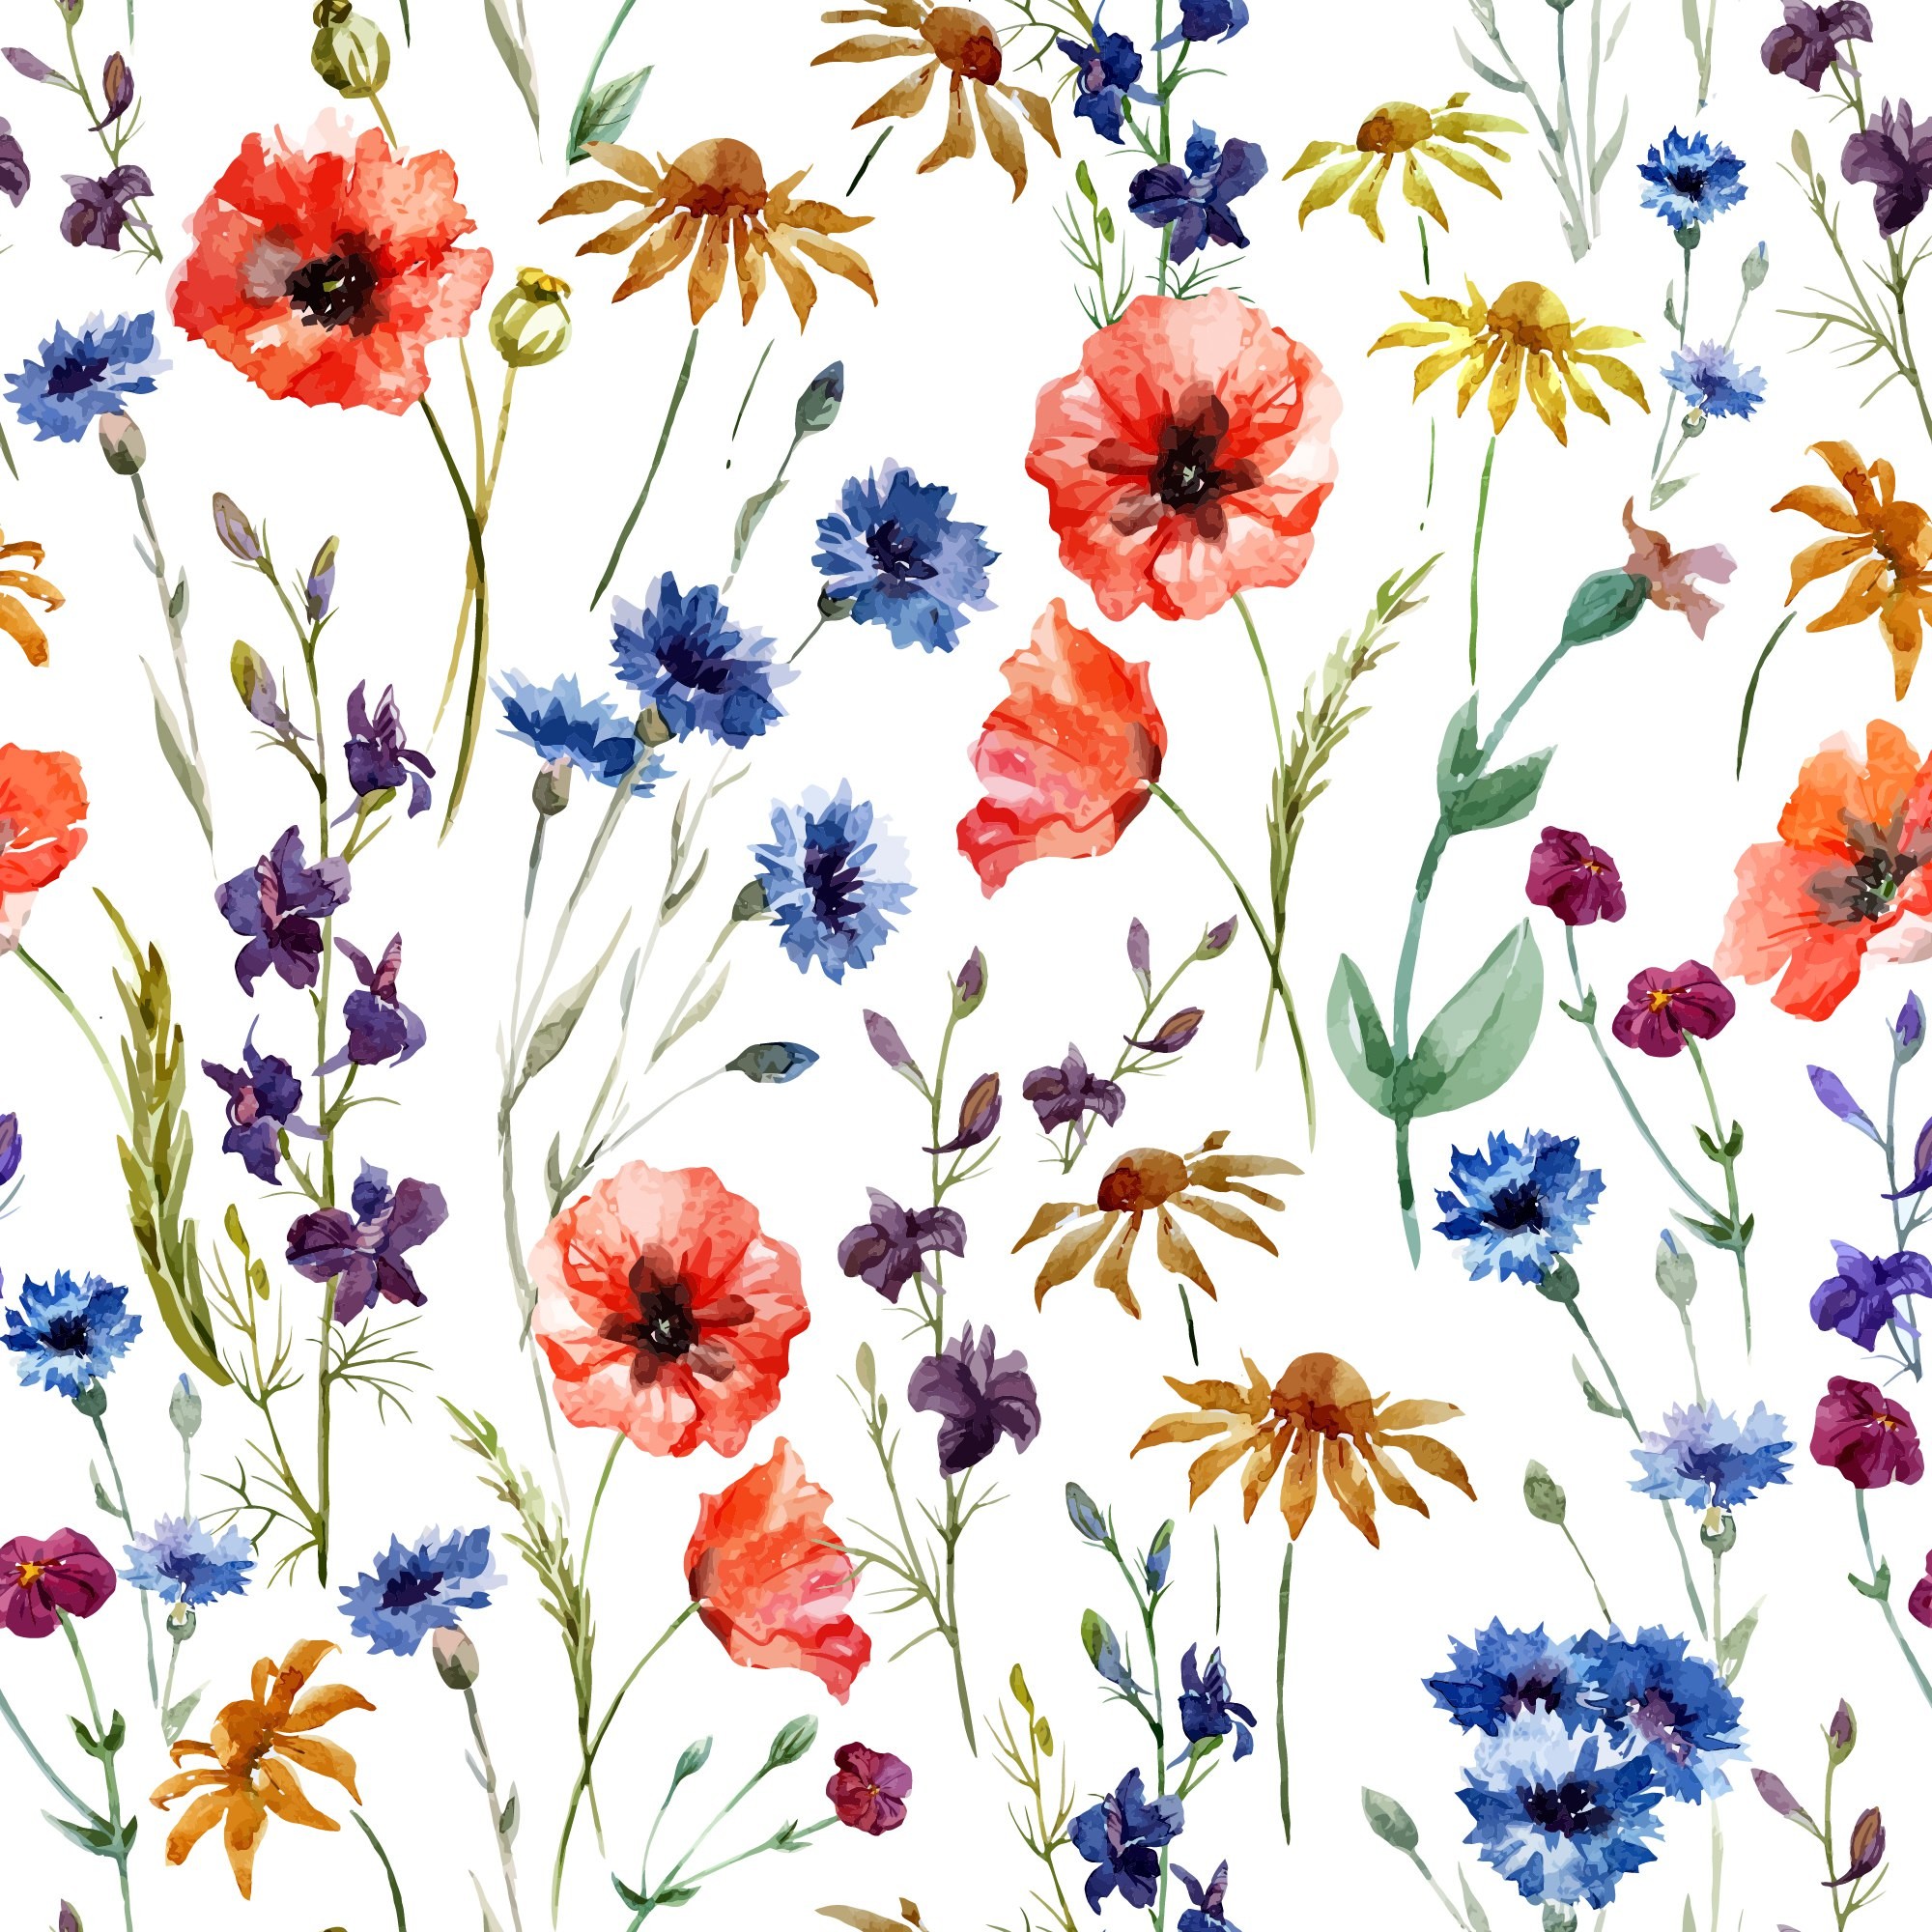 2000x2000 Background, pattern, illustration, flowers, cute, colors